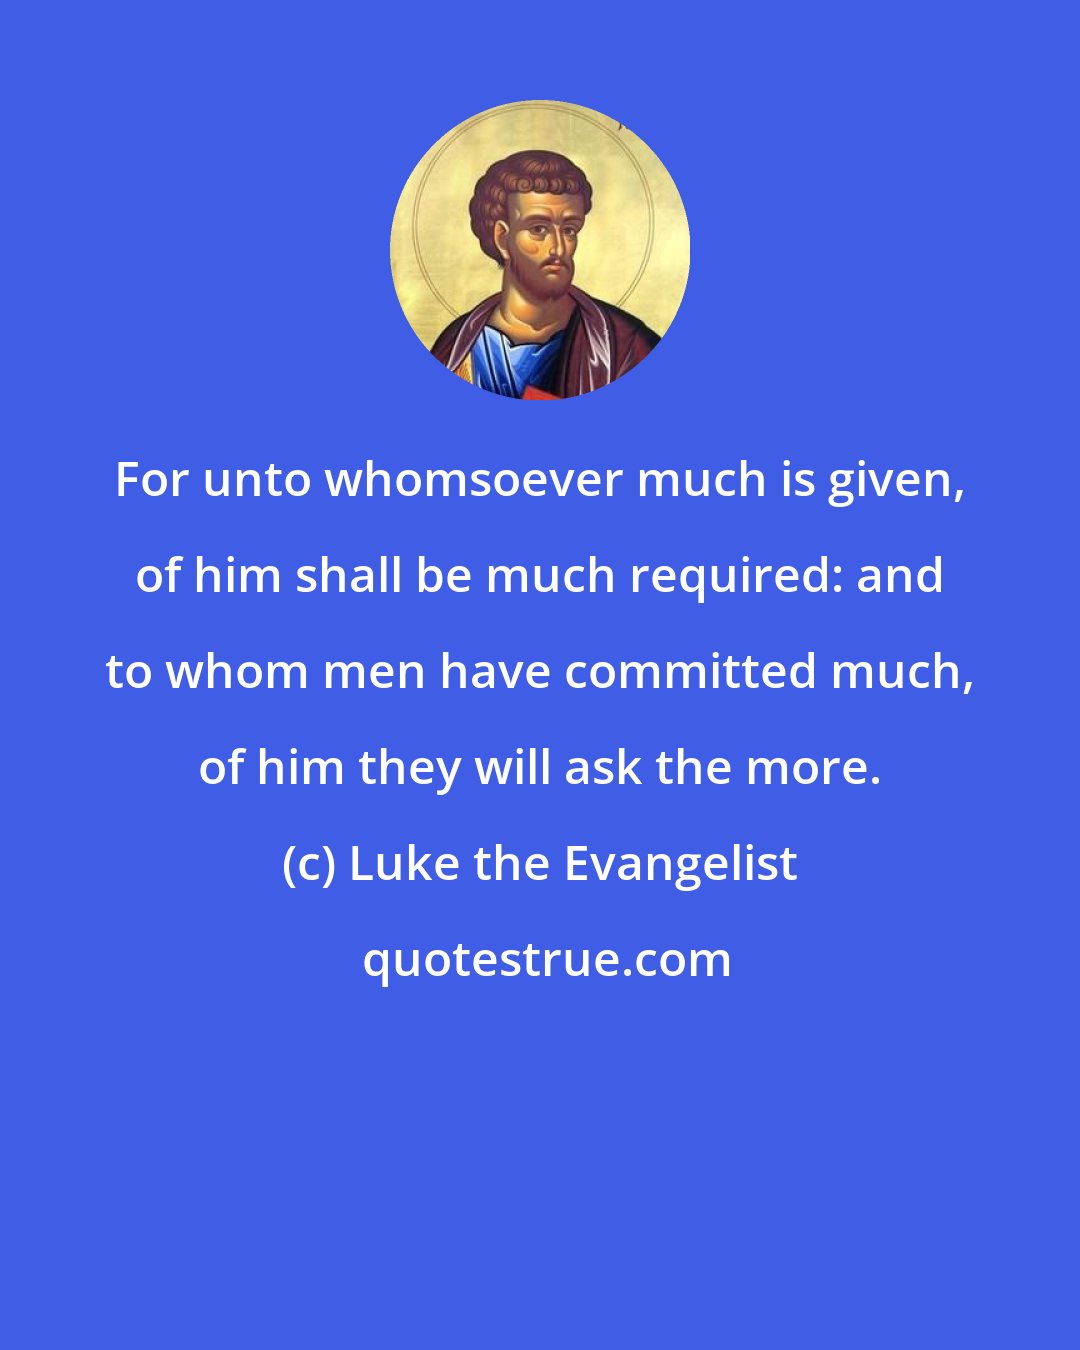 Luke the Evangelist: For unto whomsoever much is given, of him shall be much required: and to whom men have committed much, of him they will ask the more.